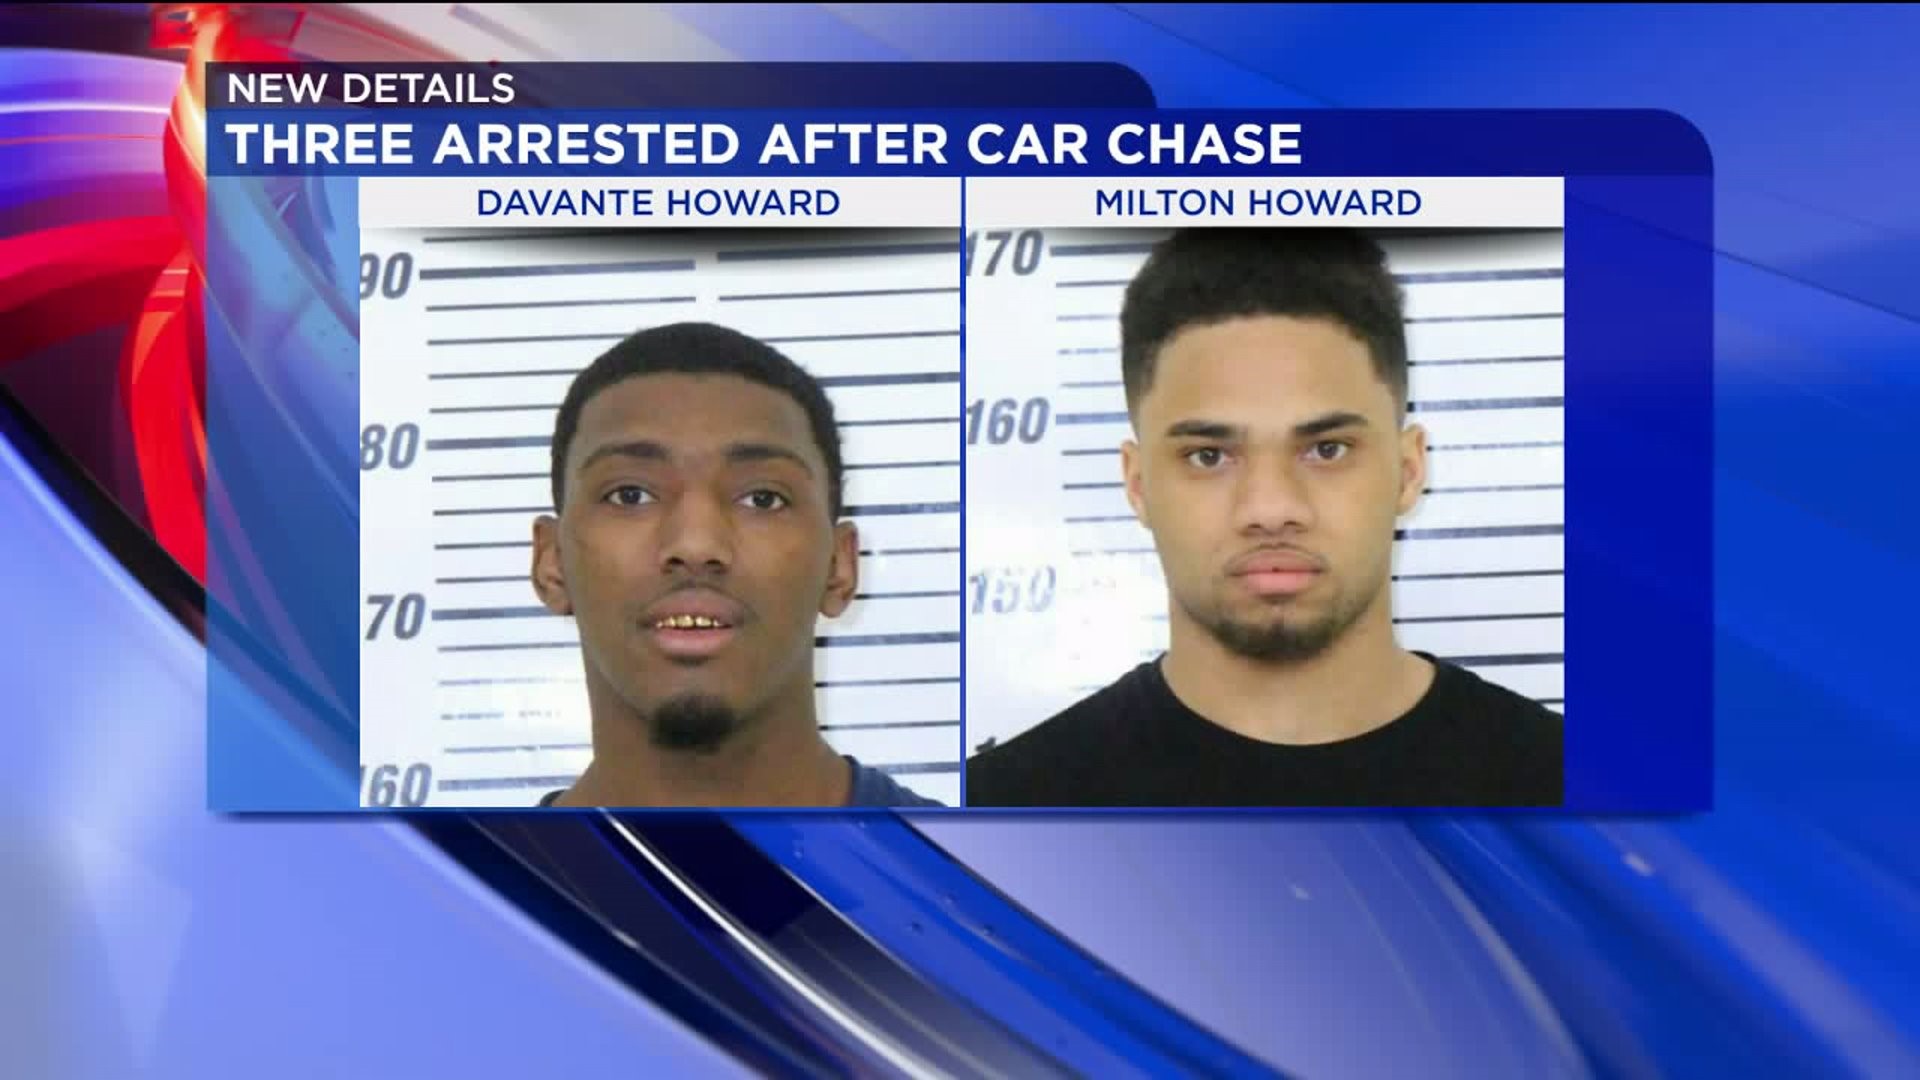 3 Arrested after Car Chase